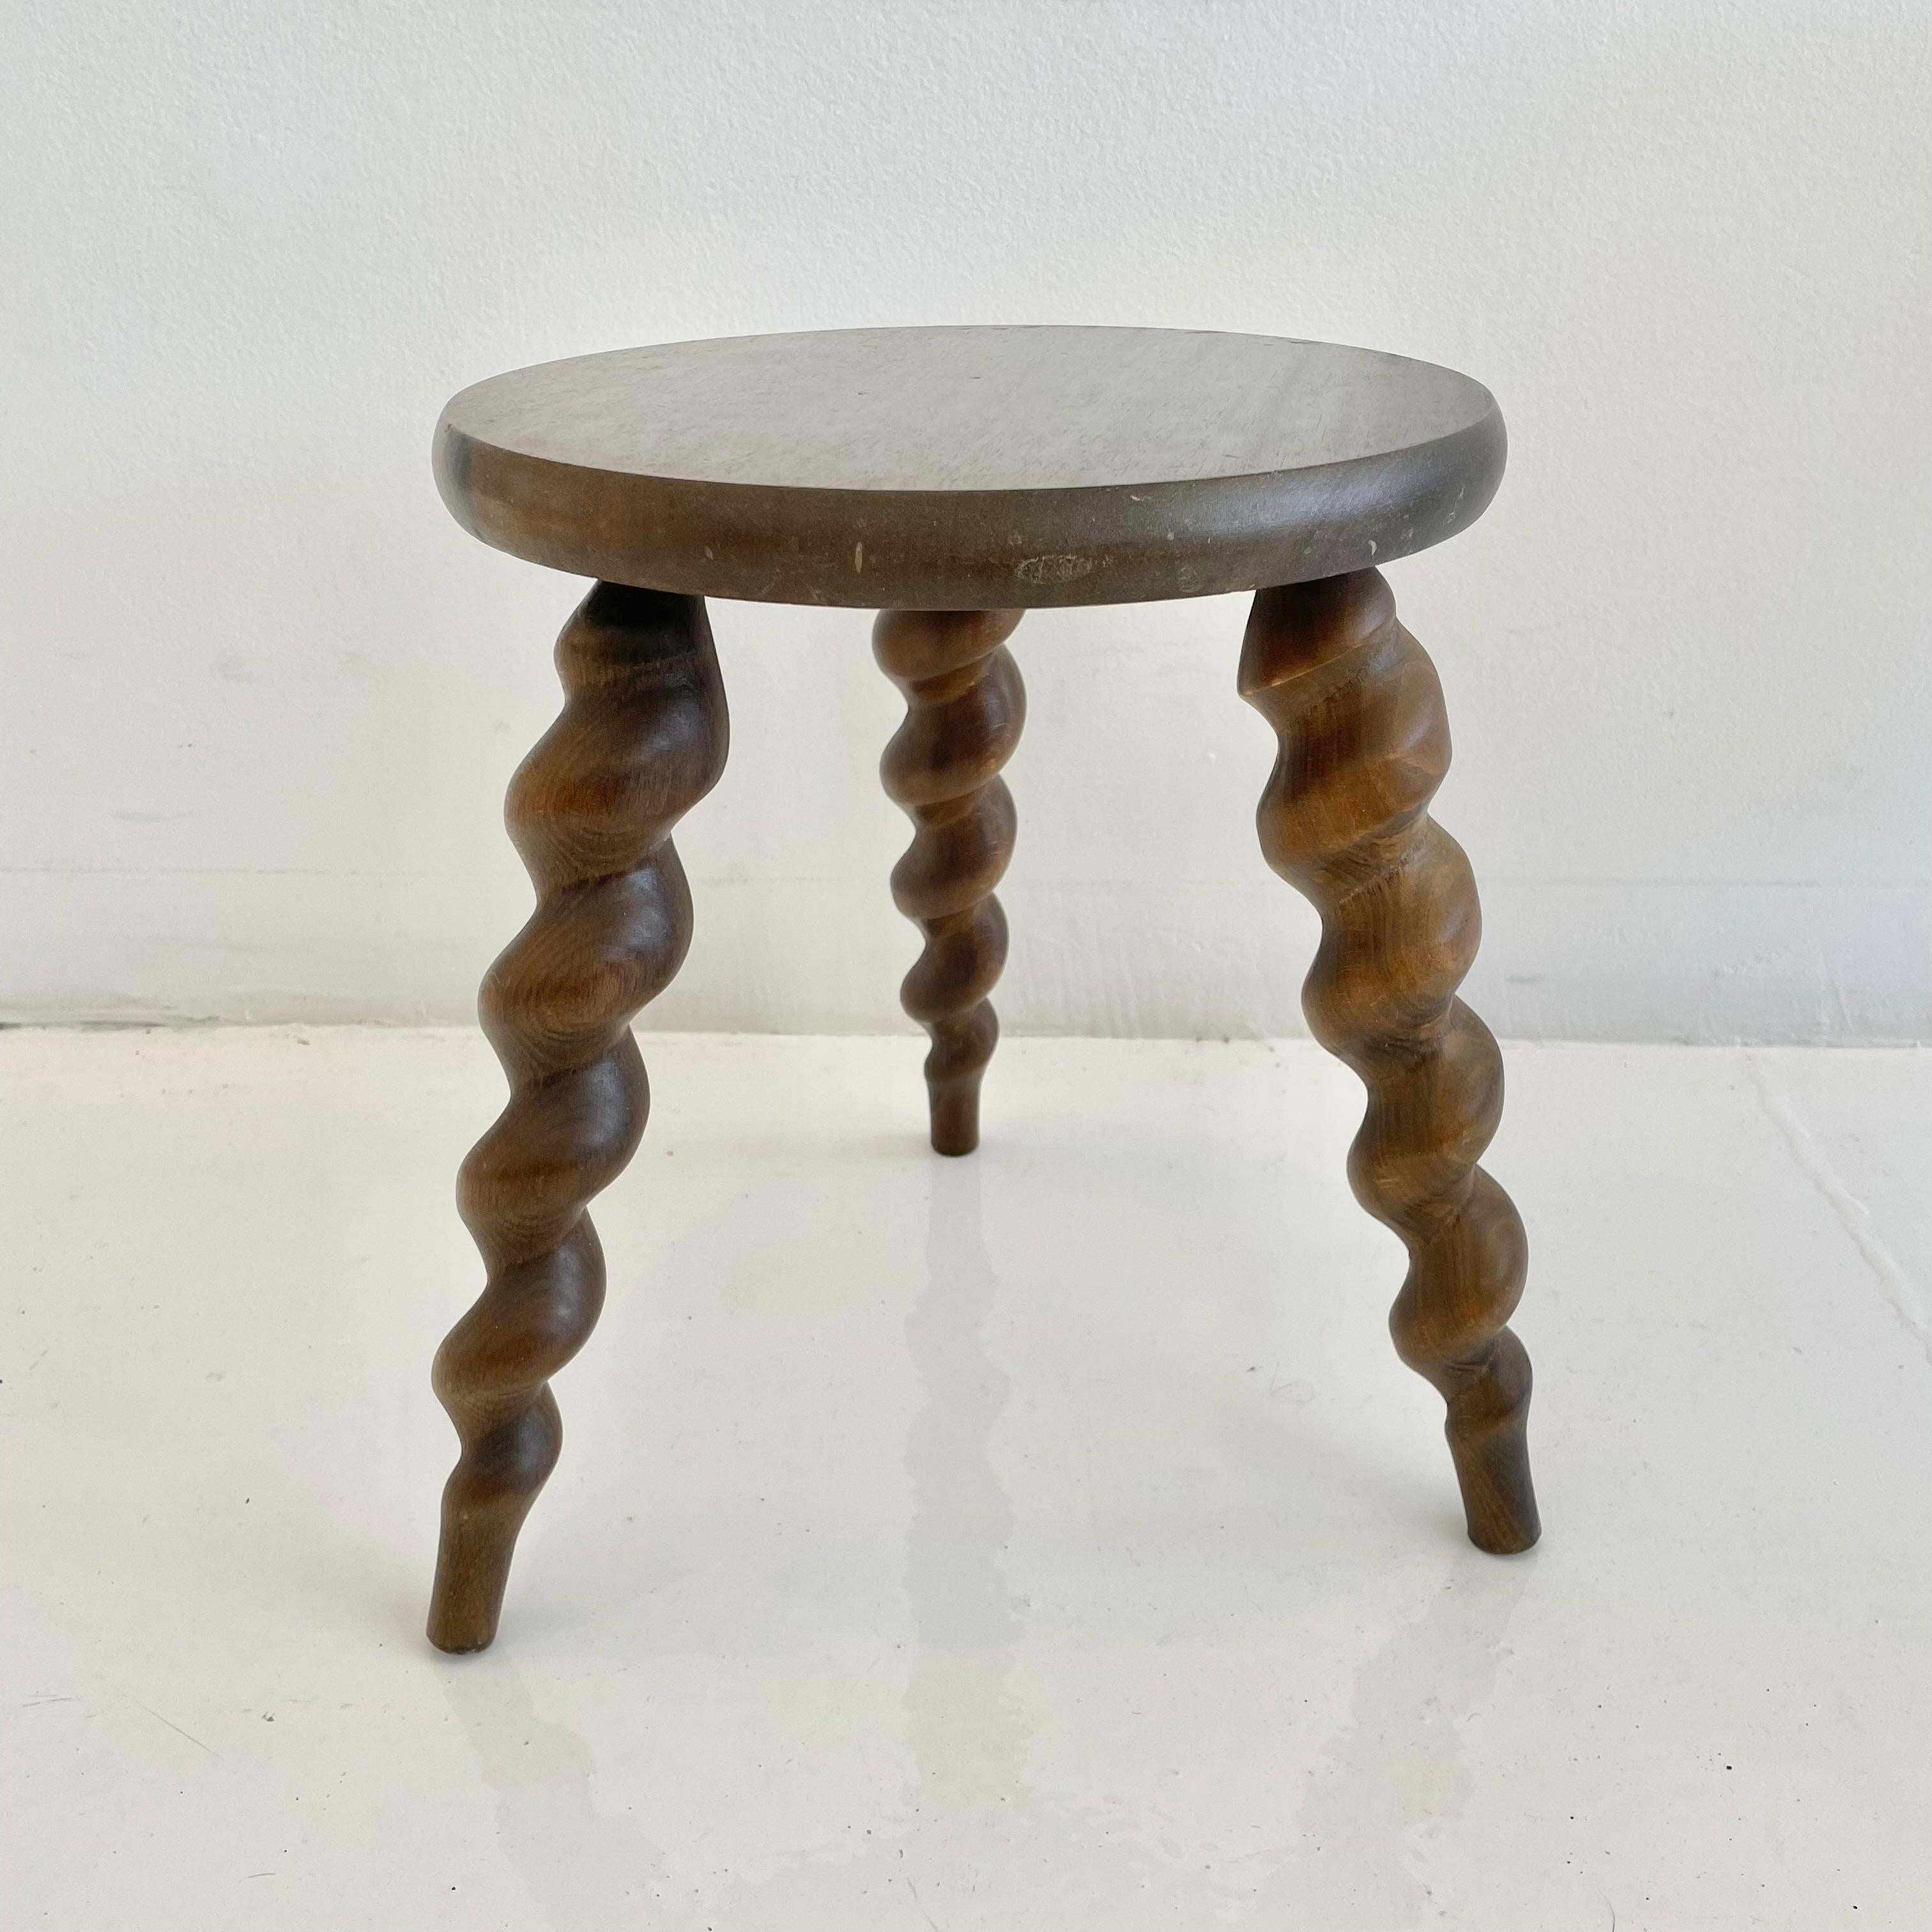 Beautiful wooden stool made in France, circa 1950s. Amazing craftsmanship on spiral legs. Great patina and grain to the dark wood. Excellent petite shape and tapered legs. Perfect for books or objects.
 